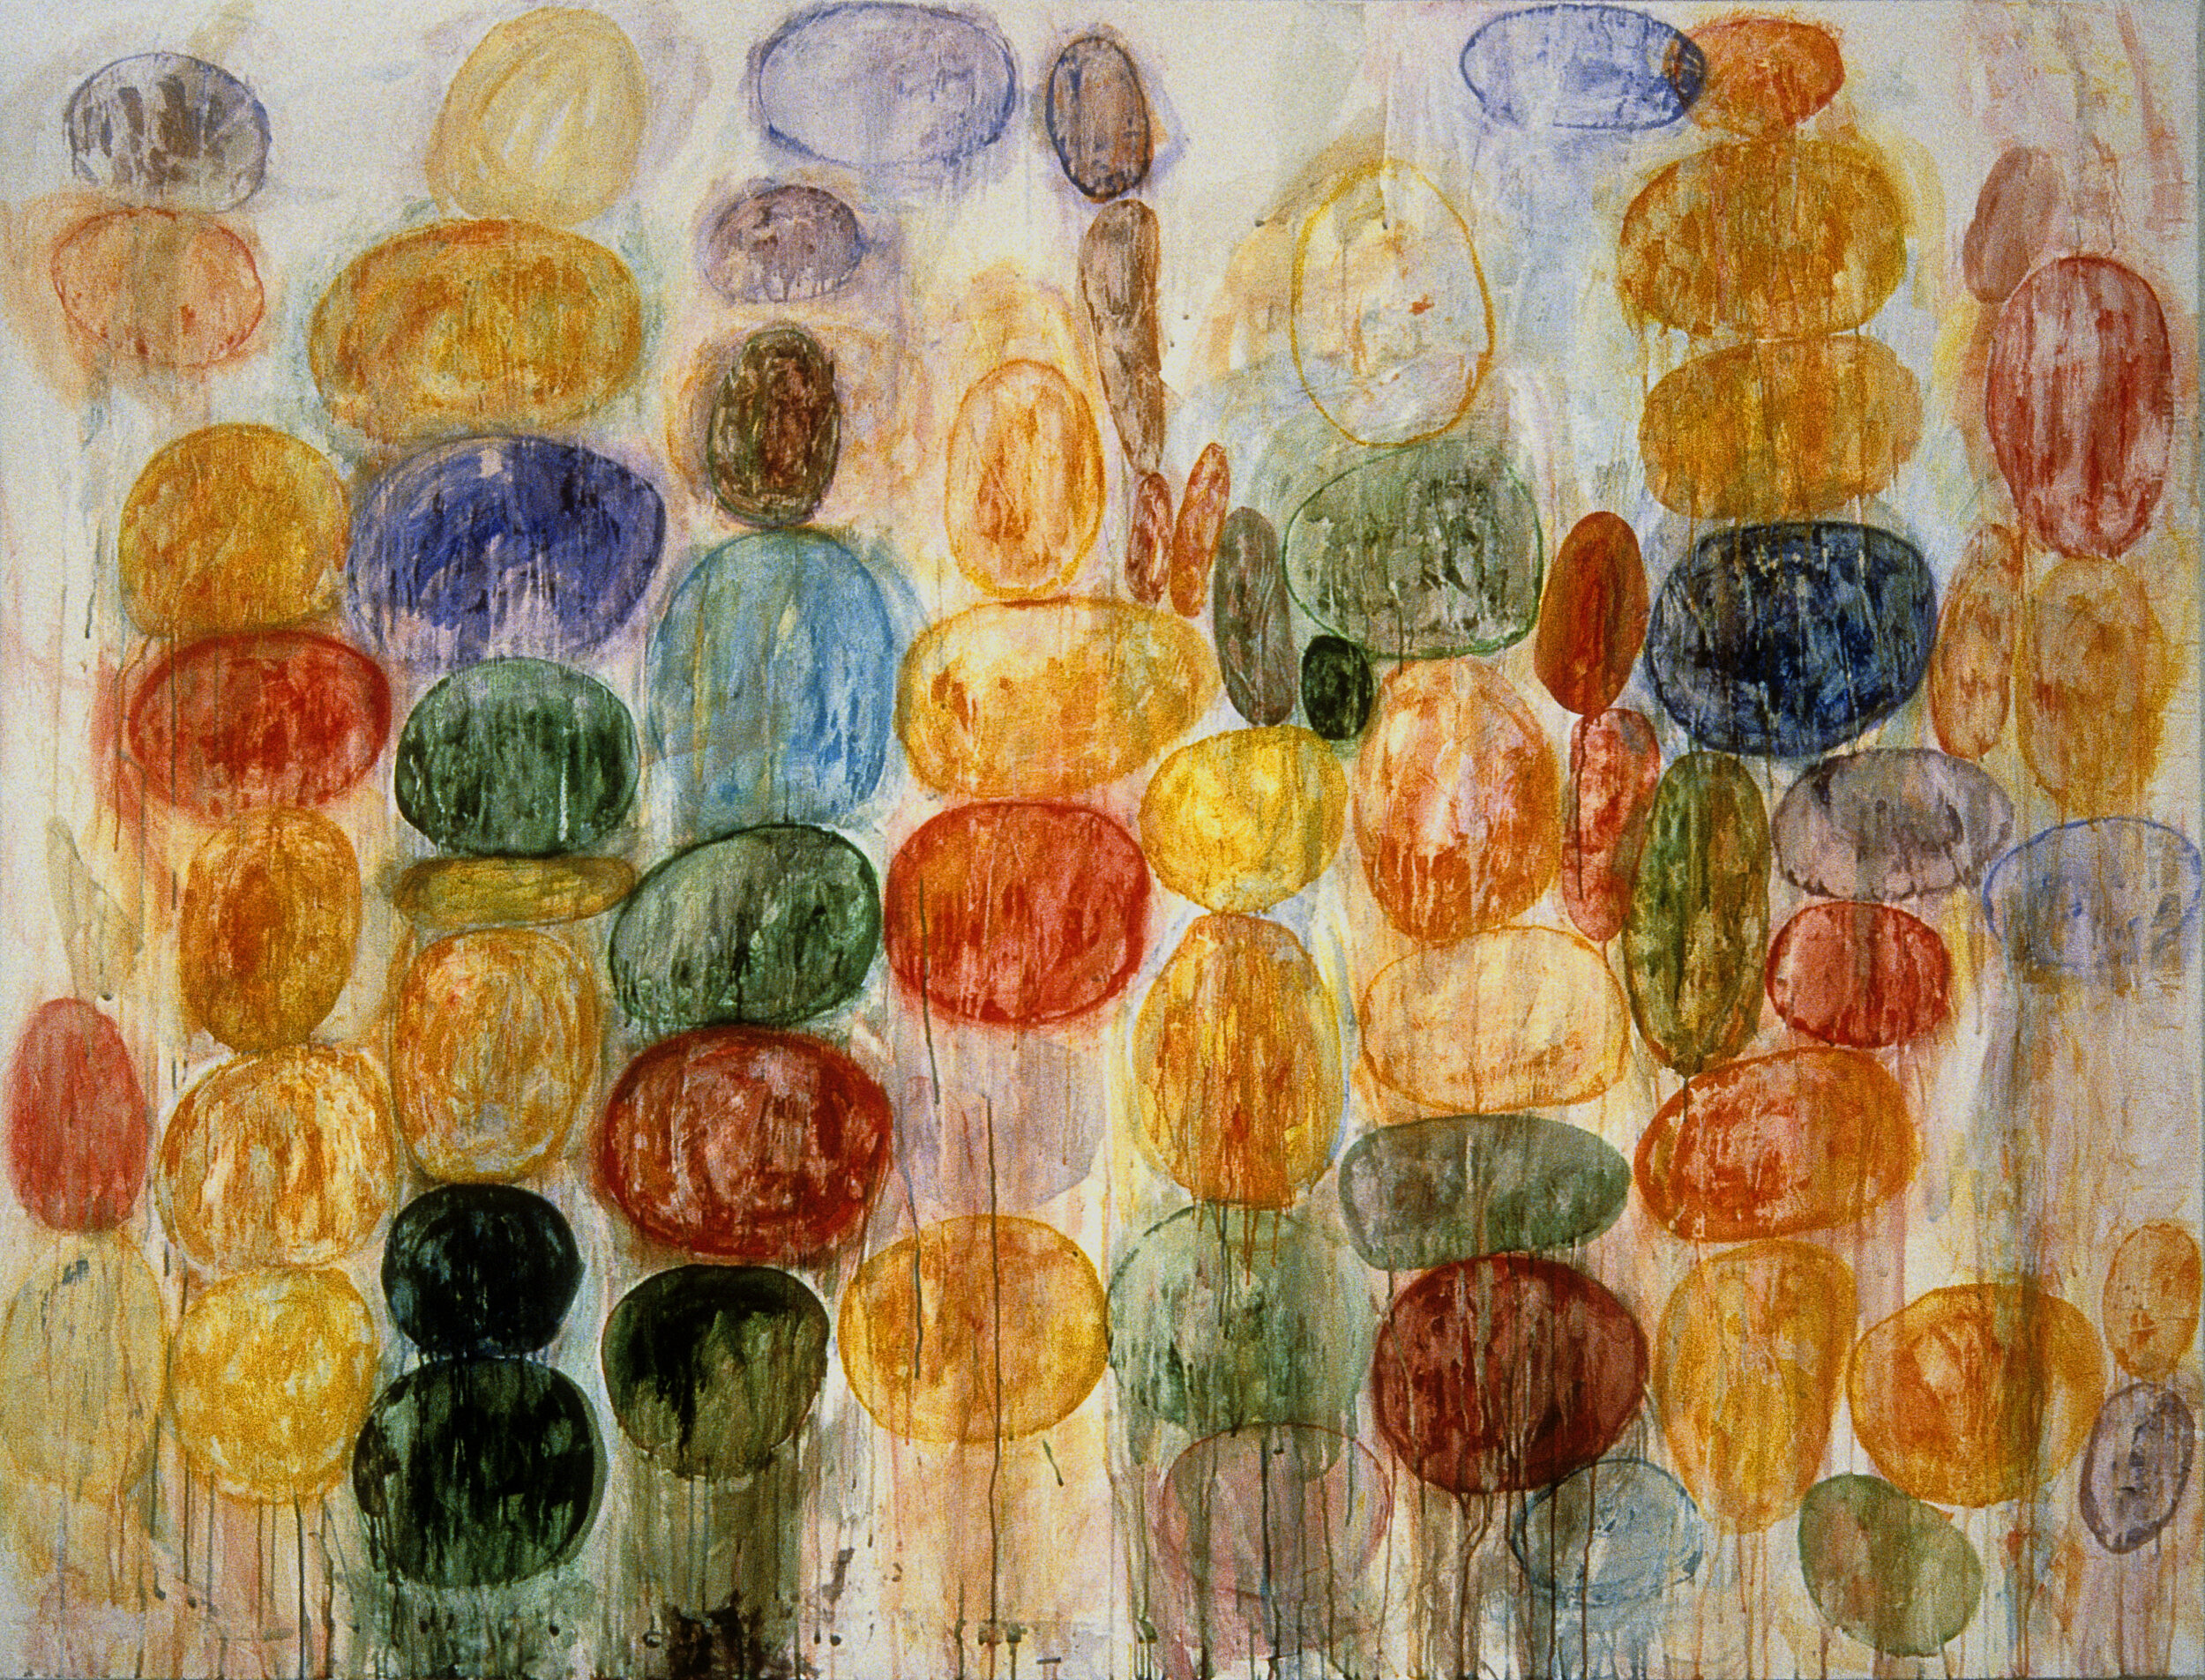   Stacked Stones , 1989, acrylic, rag vellum on canvas, 63 x 64 inches   